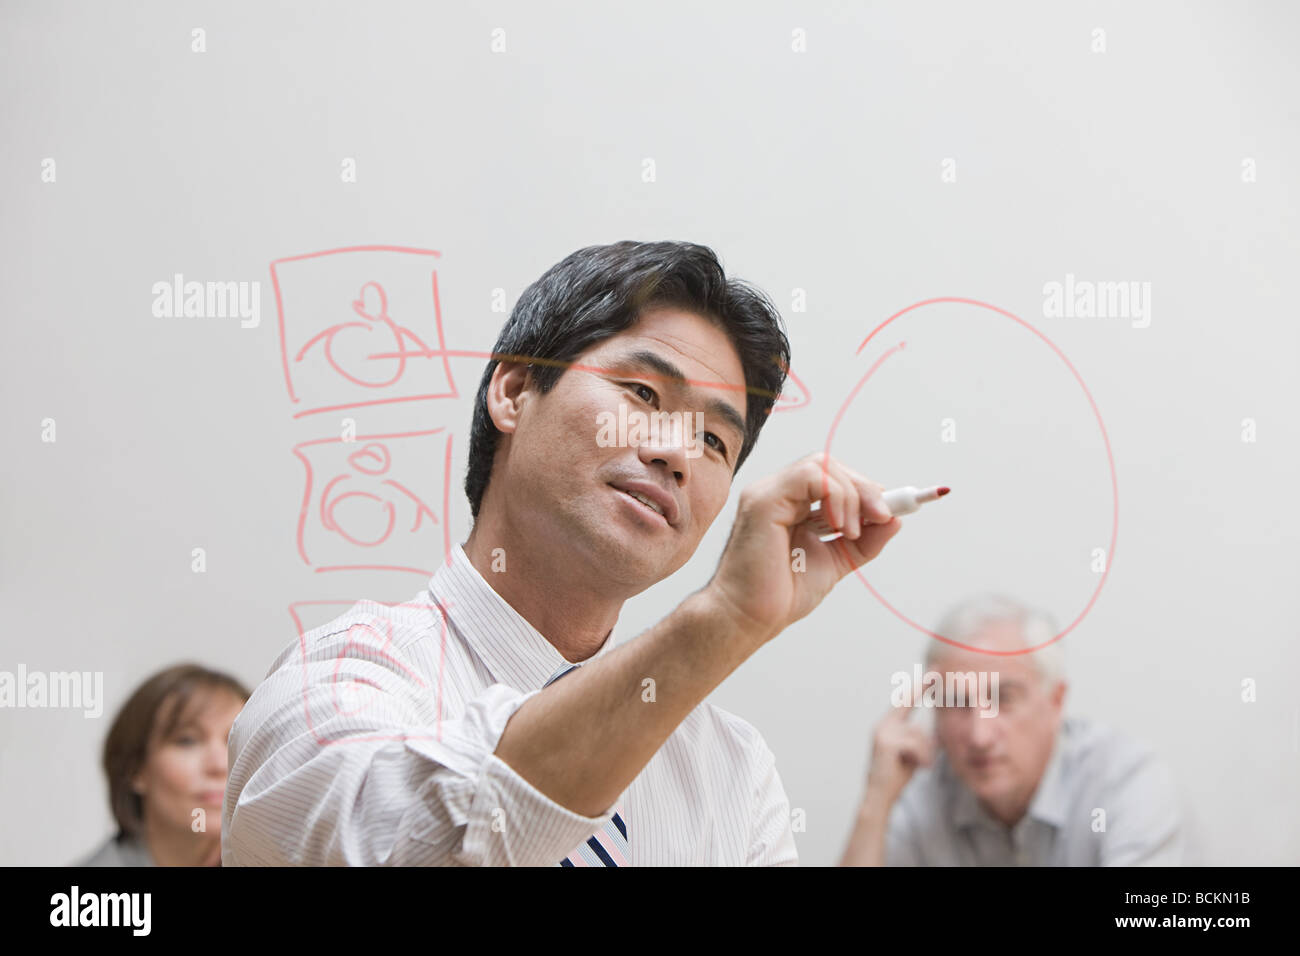 Man drawing diagram on glass wall Stock Photo